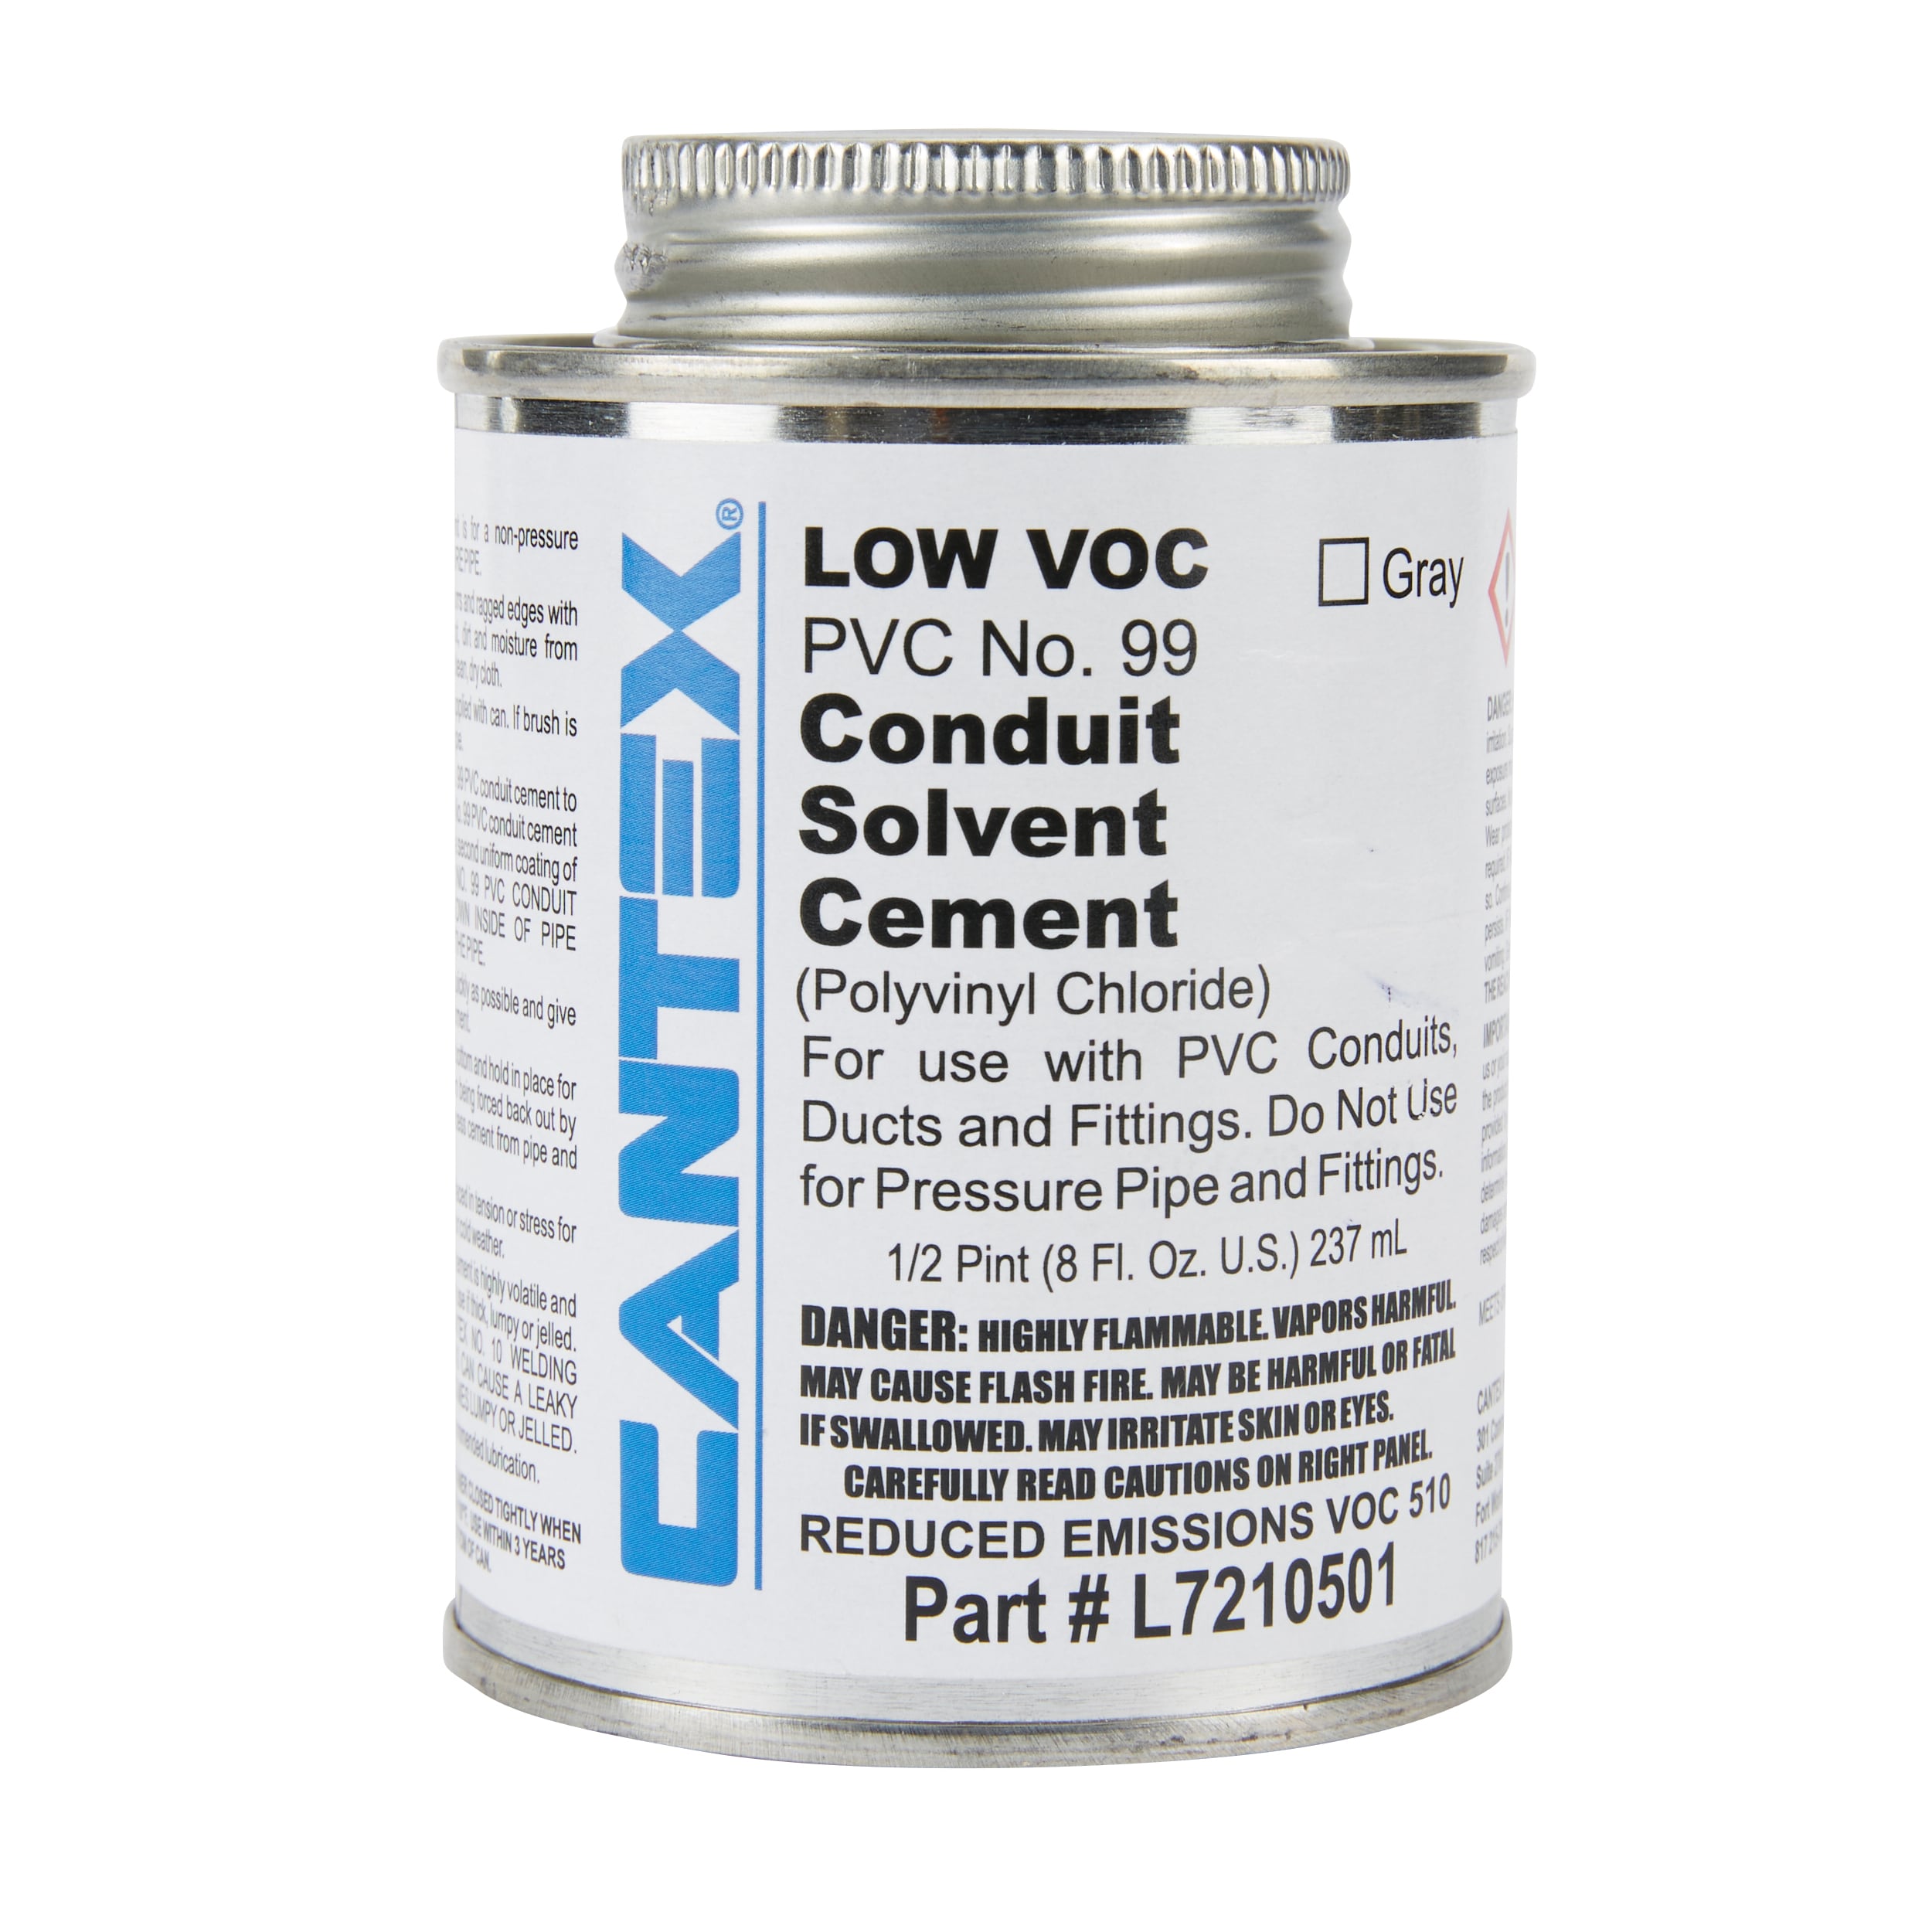 PVC cement Pipe Cements, Primers & Cleaners at